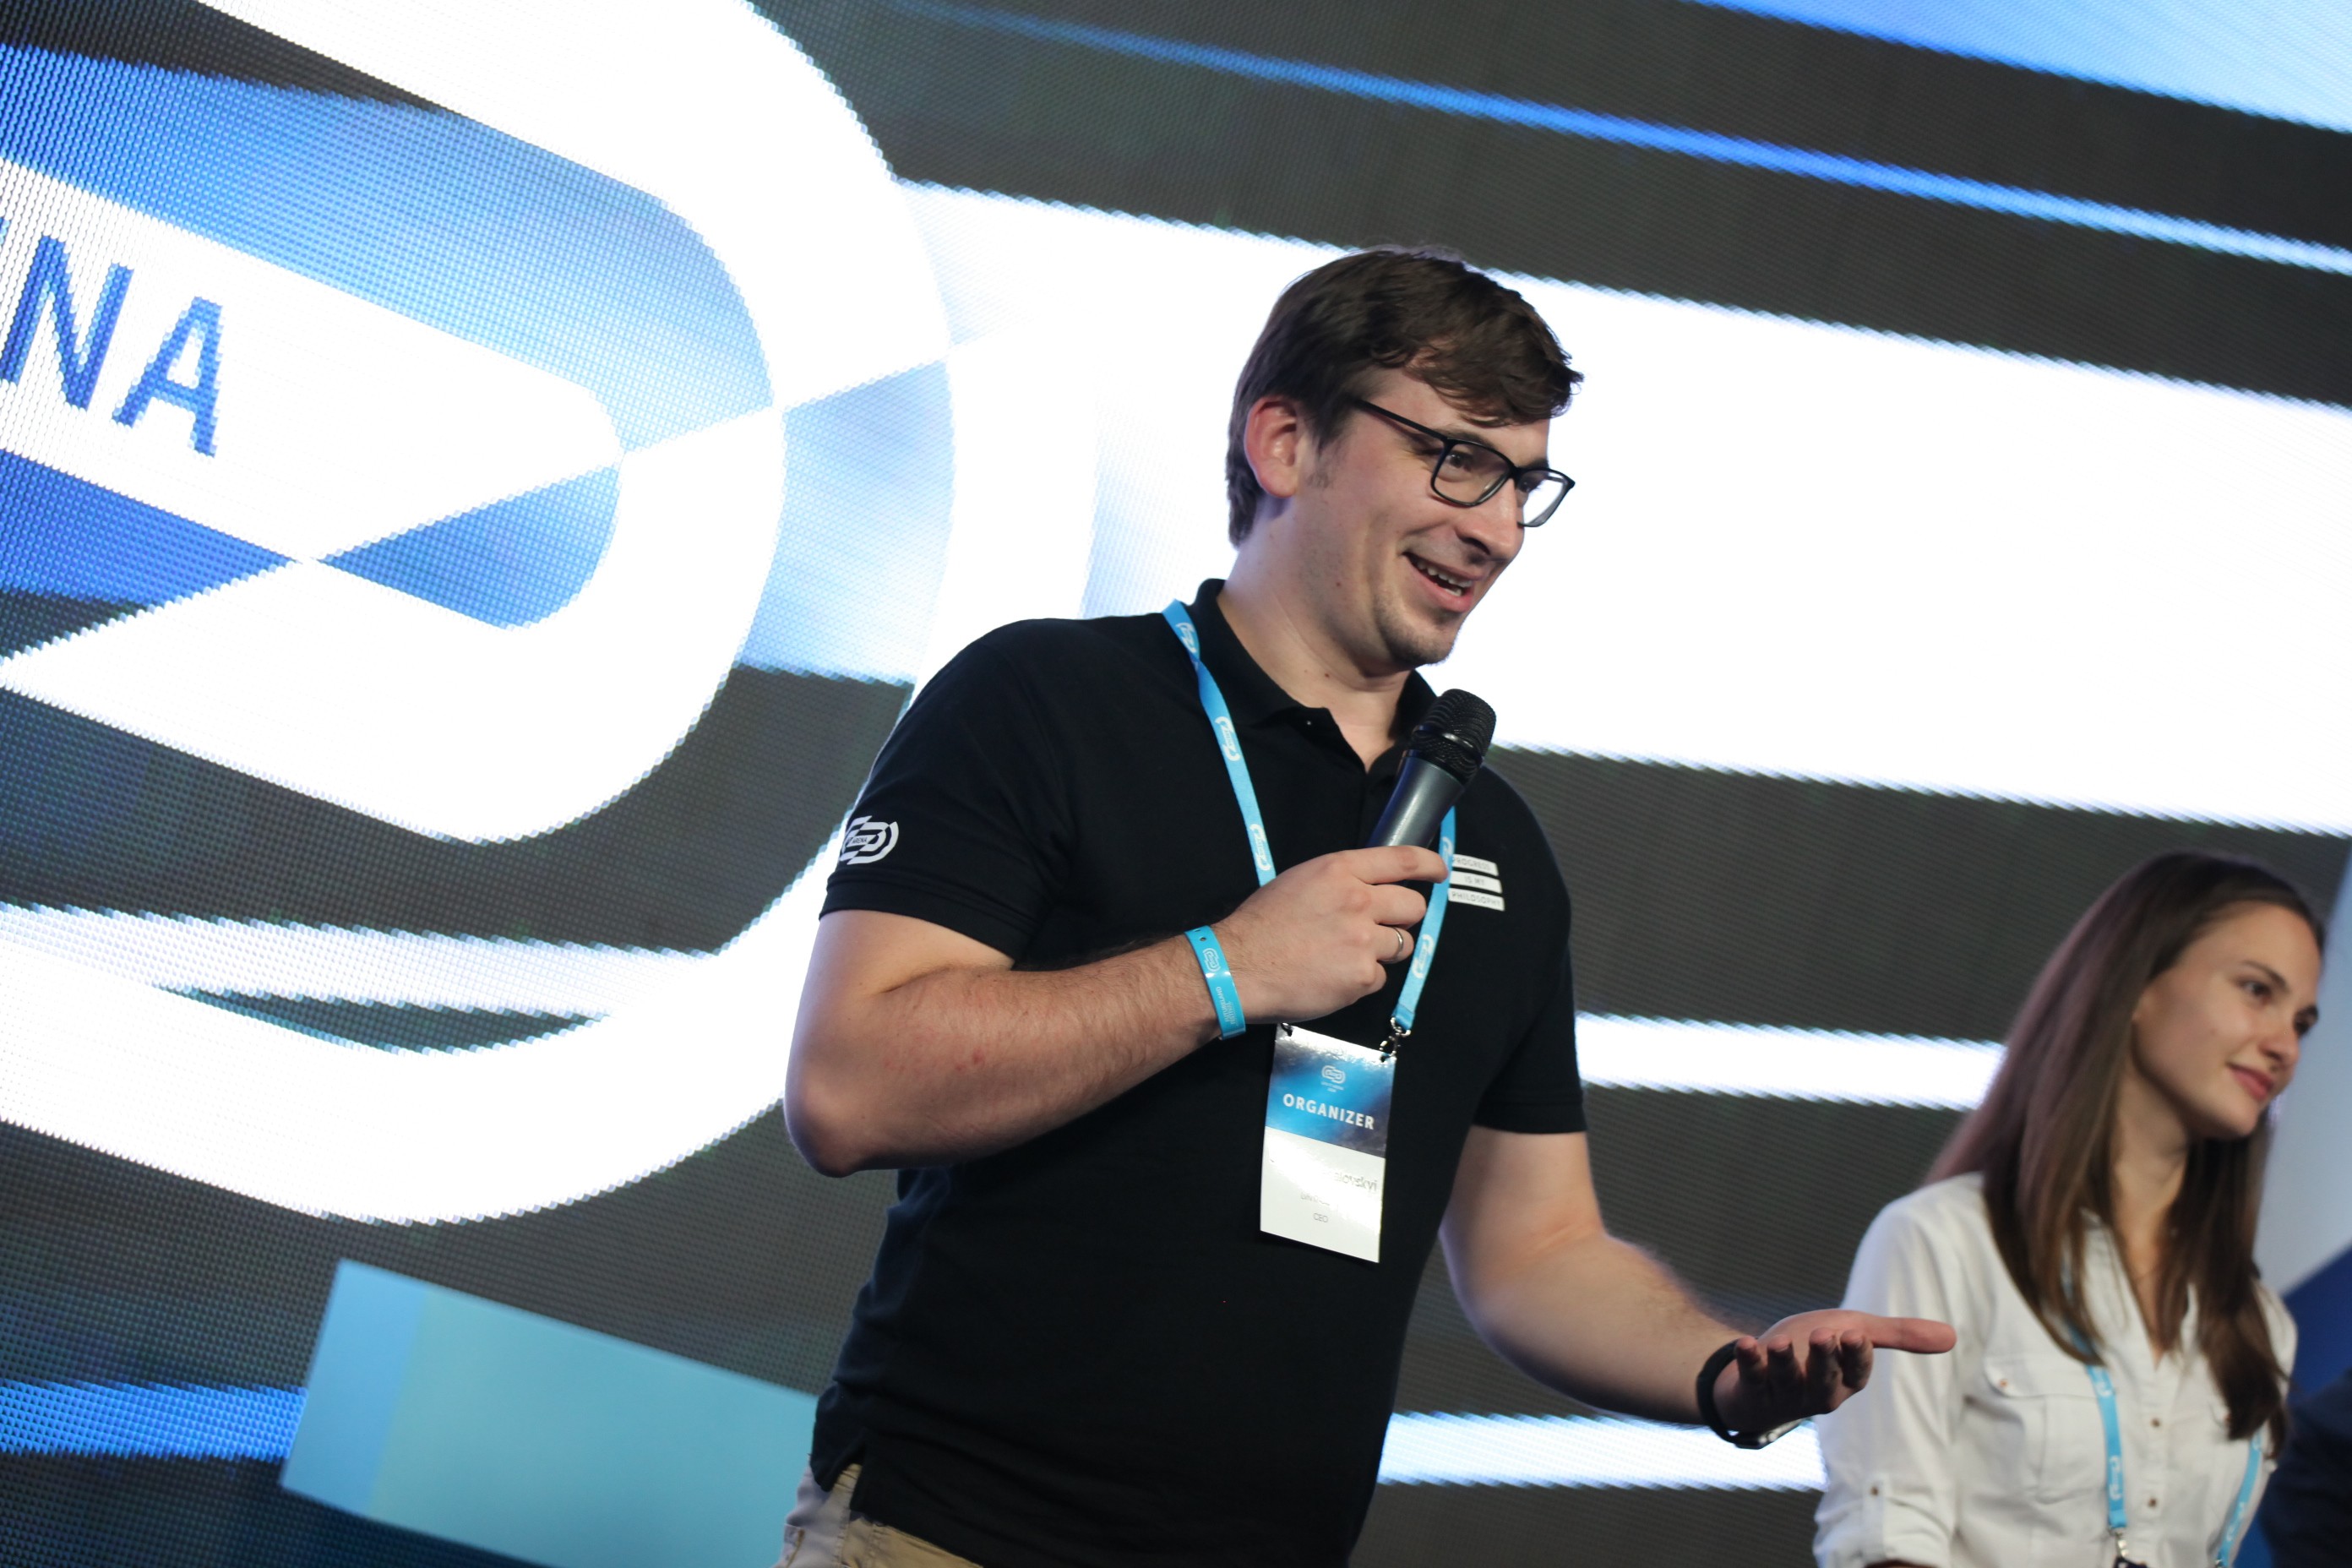 Stephan Veselovsky, one of the organizers of the Lviv IT Arena conference and the CEO of the Lviv IT Cluster, a non-profit association of tech companies, talks to the audience on Sept. 30.